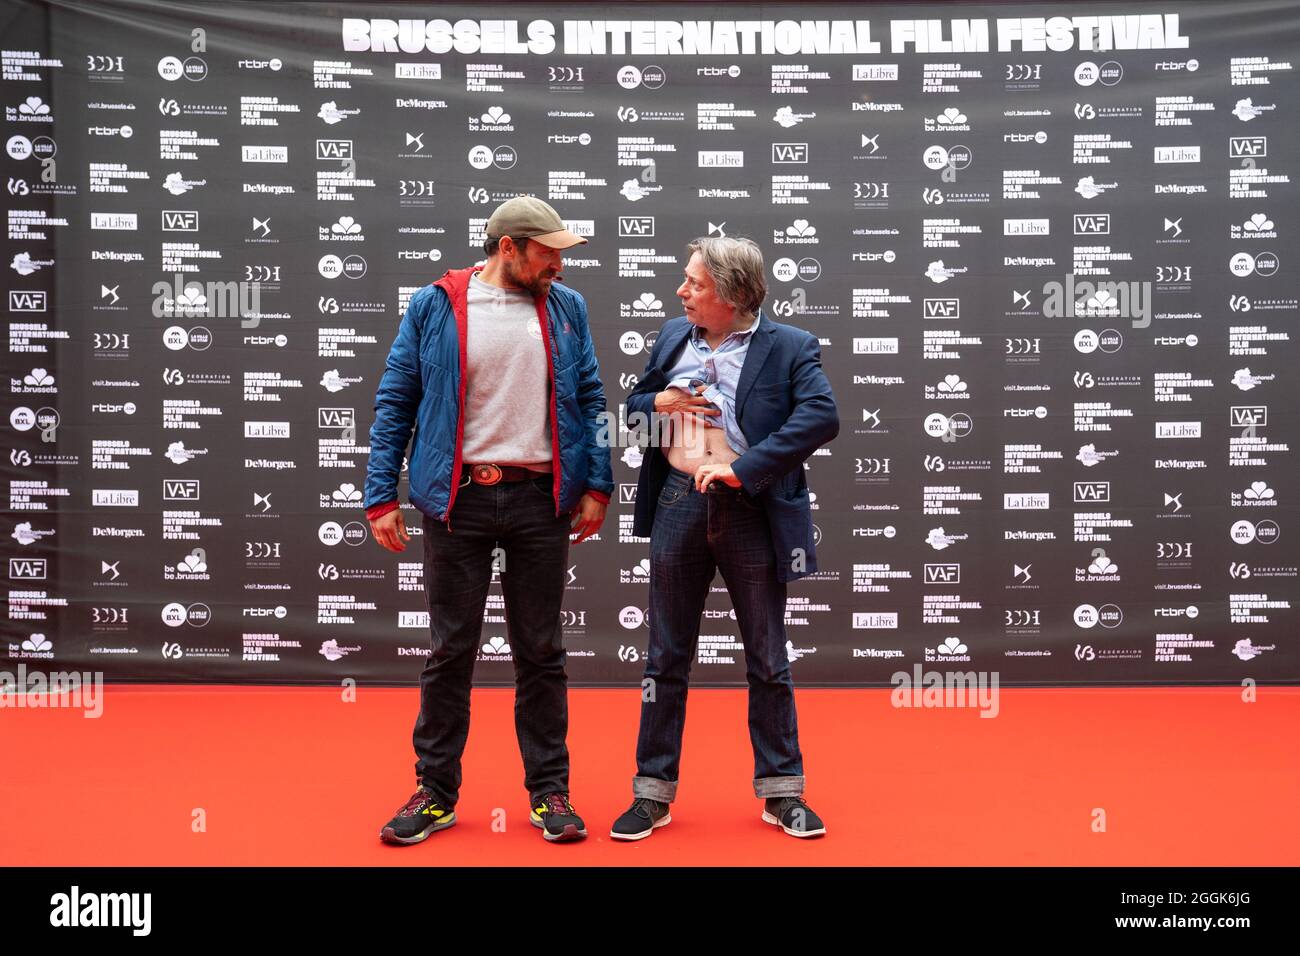 actor Arieh Worthalter and Mathieu Amalric  pictured during the red carpet on the opening night of the 'Brussels International Film Festival' (BRIFF), Stock Photo